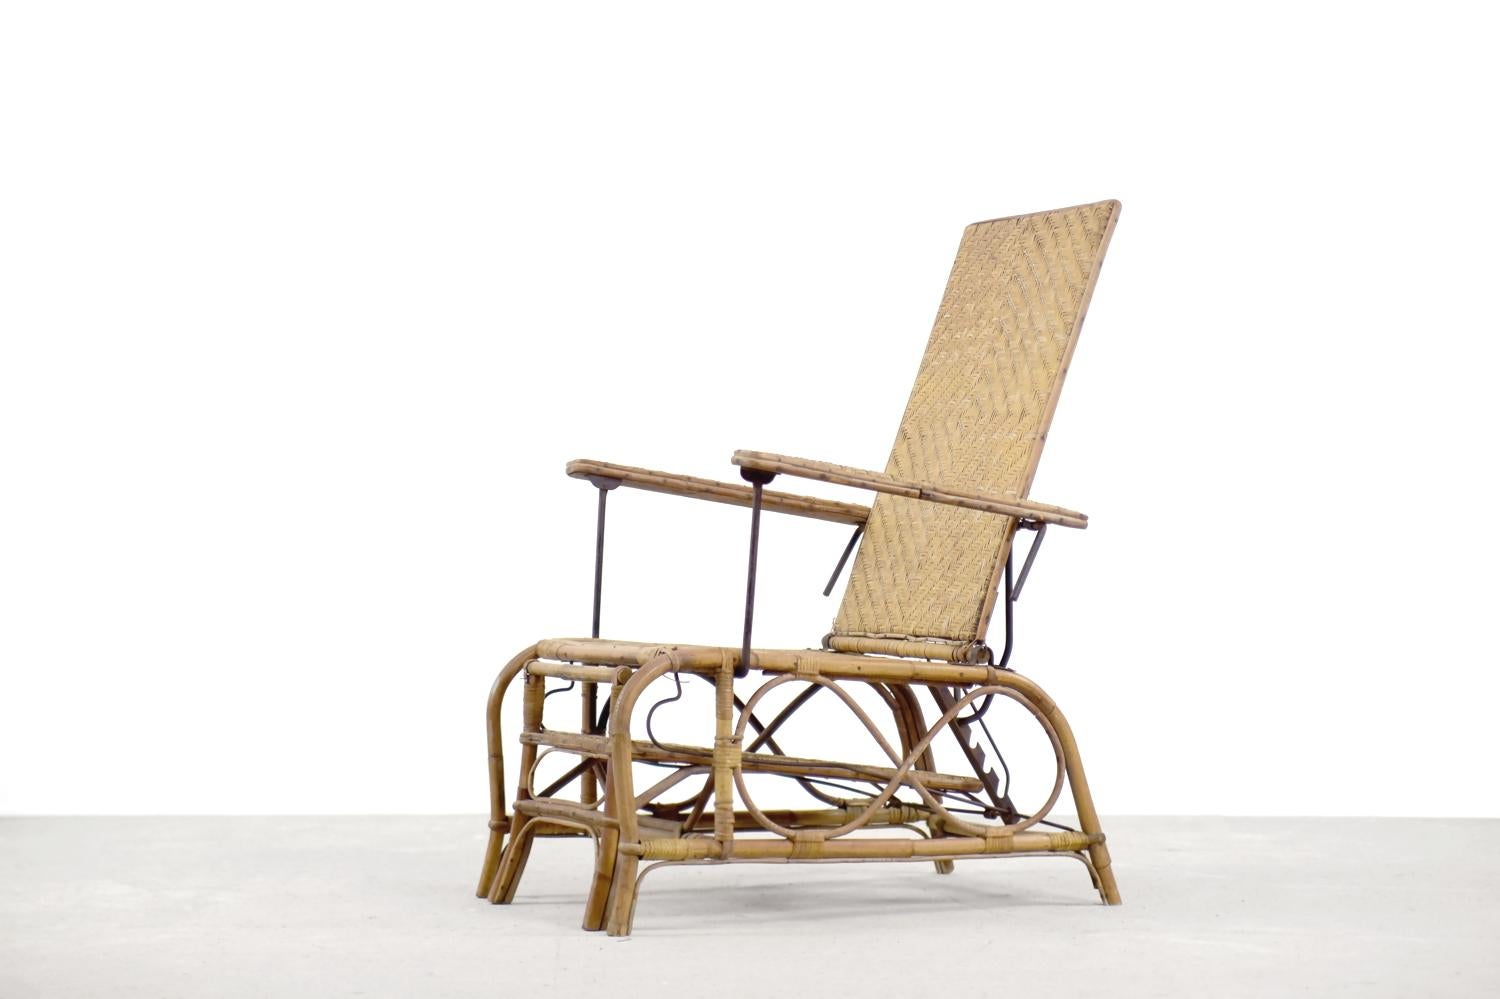 This Bauhaus-style armchair was designed by Erich Dieckmann in Germany during the 1930s. This chair is made from three kinds of materials: rattan, bamboo and metal. The using of high-quality hardwood and cane mat softened the rough geometry of the